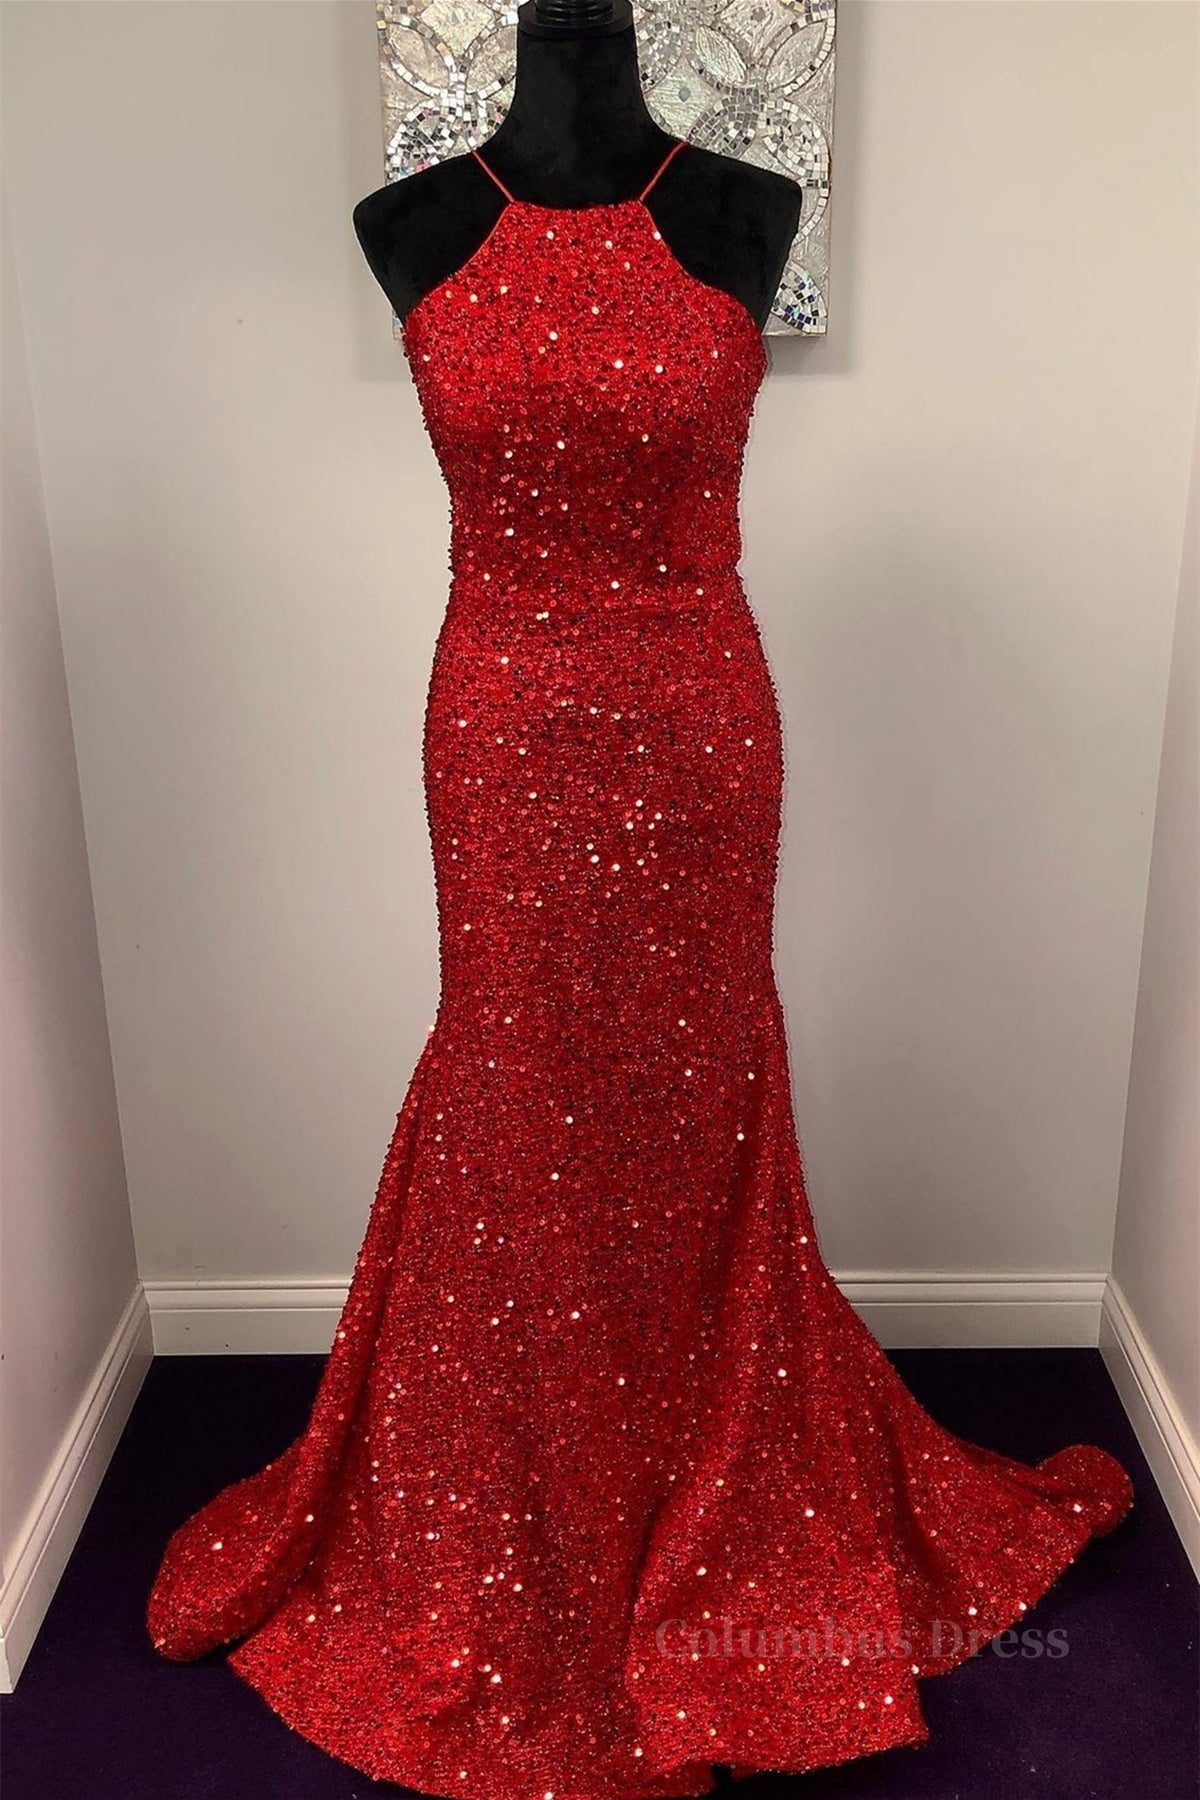 Shiny Sequins Backless Mermaid Red Long Corset Prom Dresses, Mermaid Red Corset Formal Dresses, Backless Red Evening Dresses outfit, Formal Dress Winter